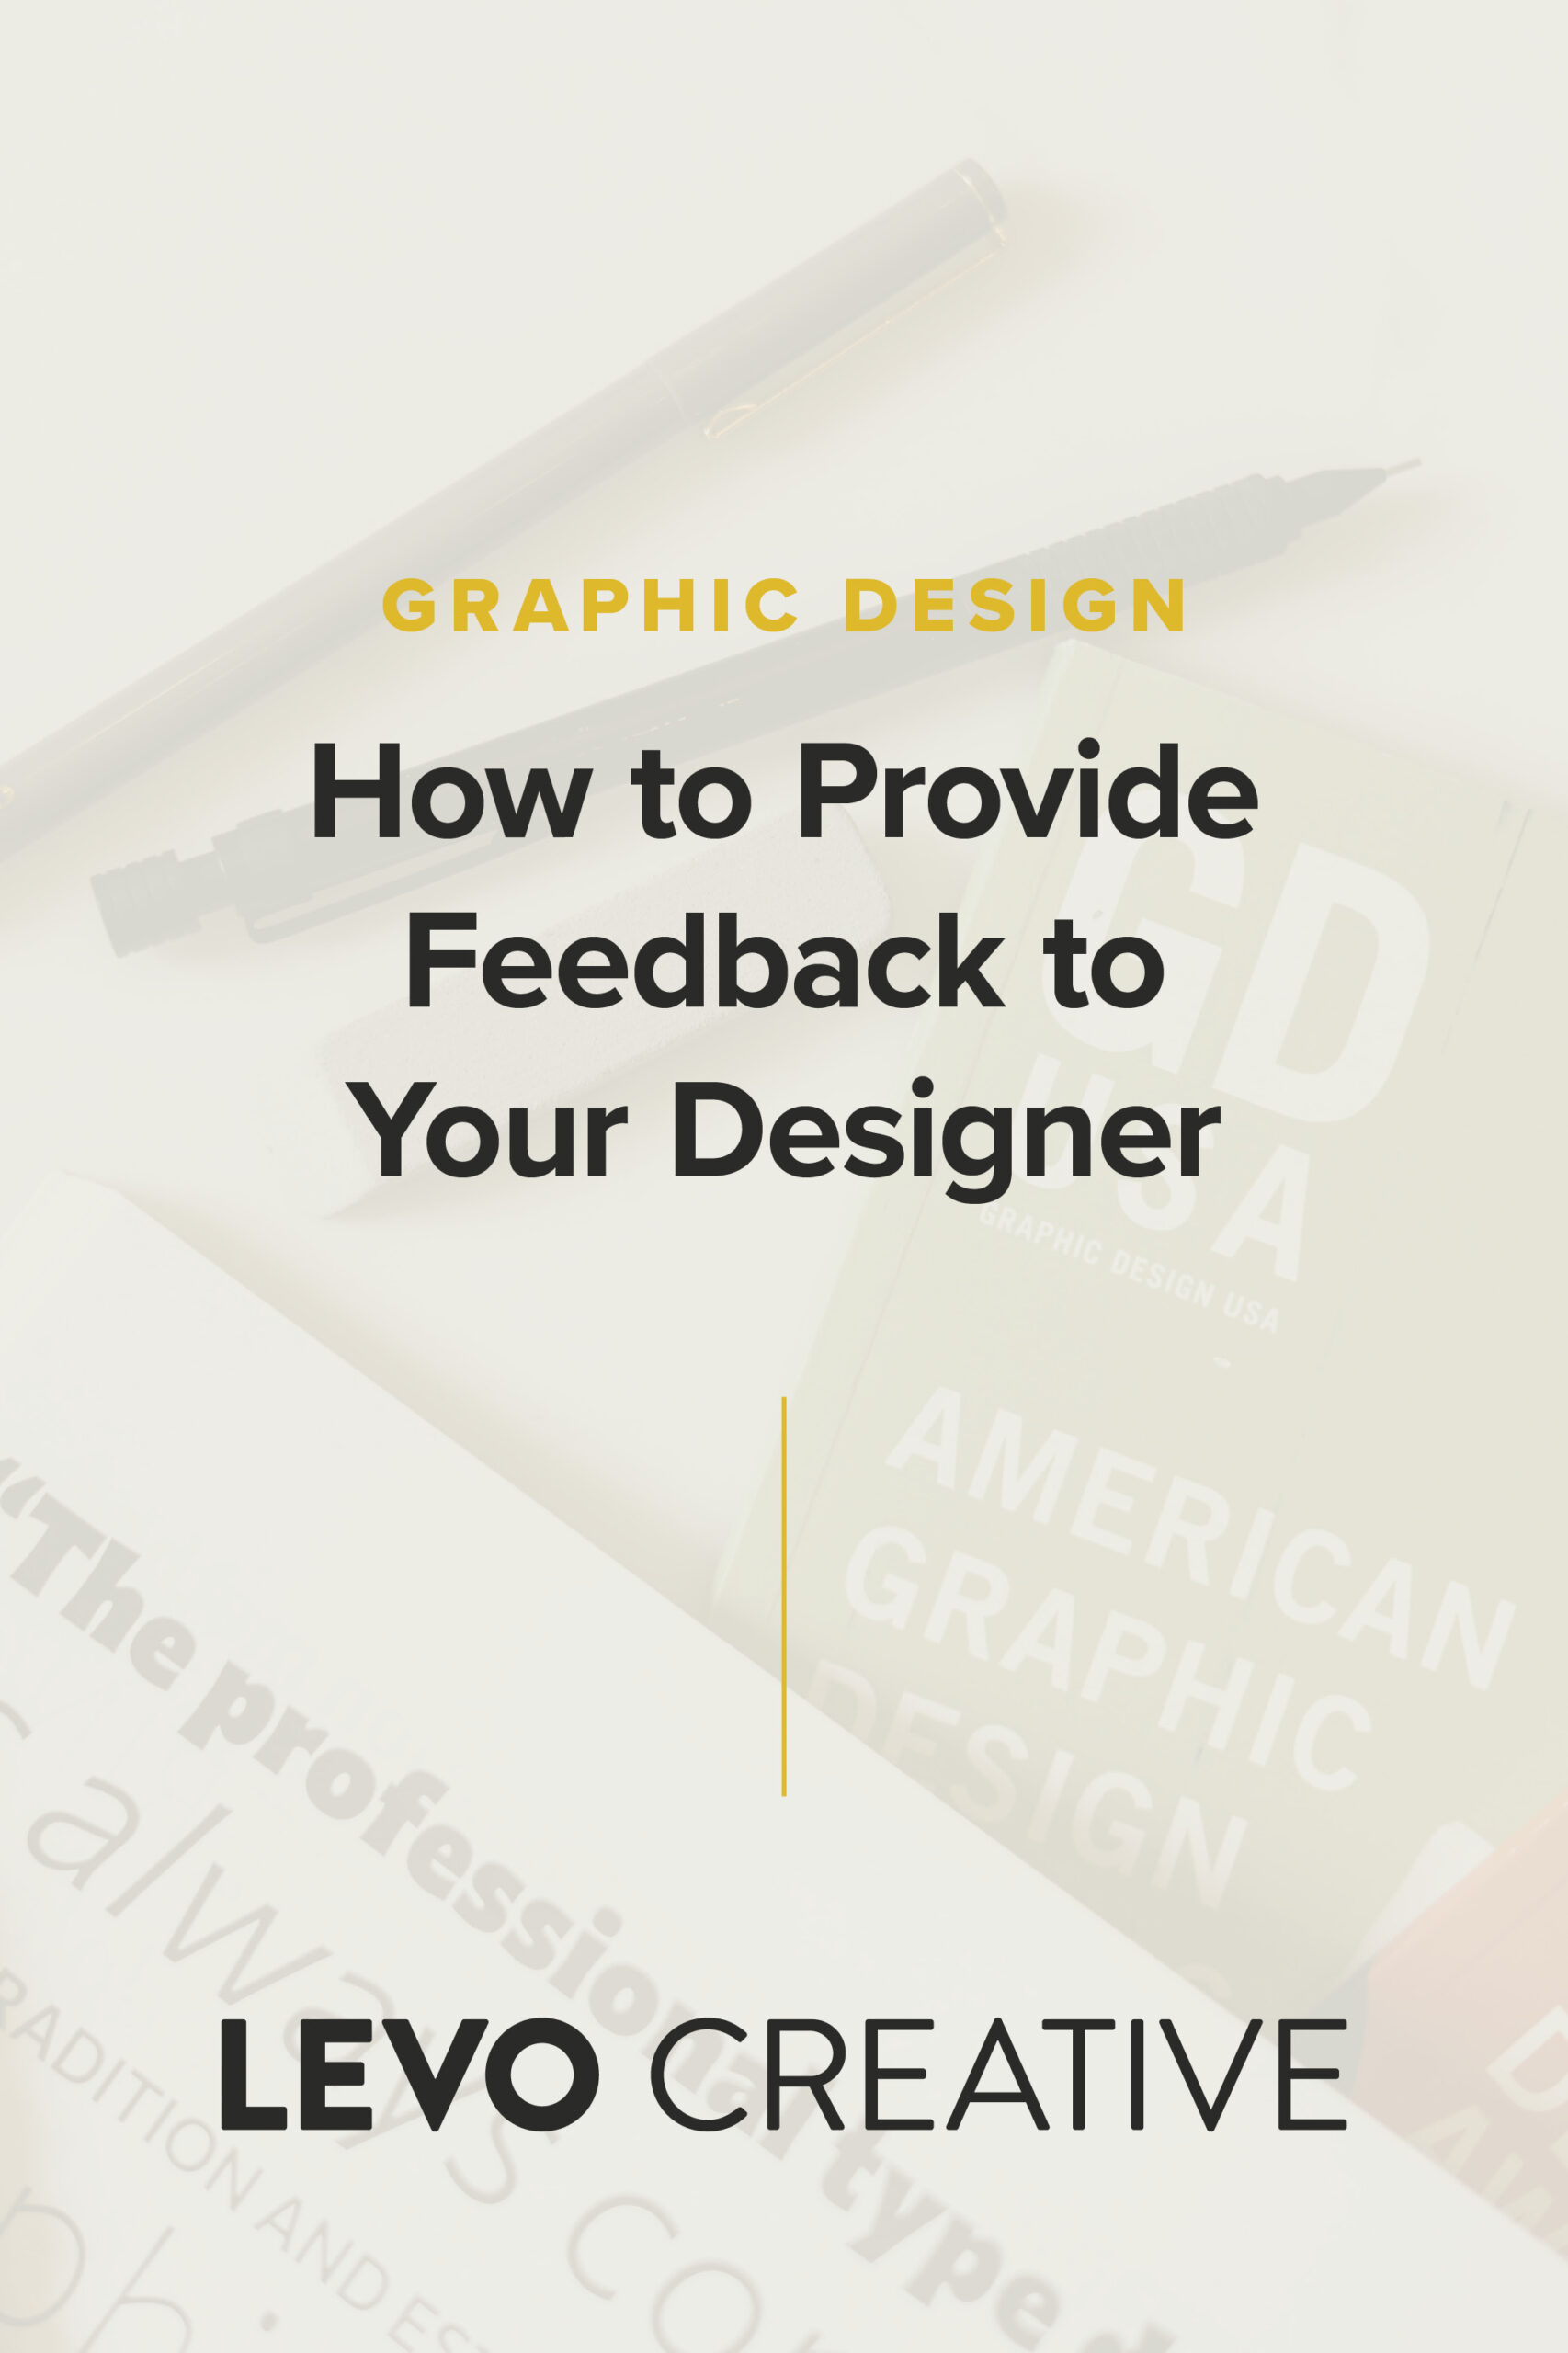 How to Provide Feedback to Your Graphic Designer